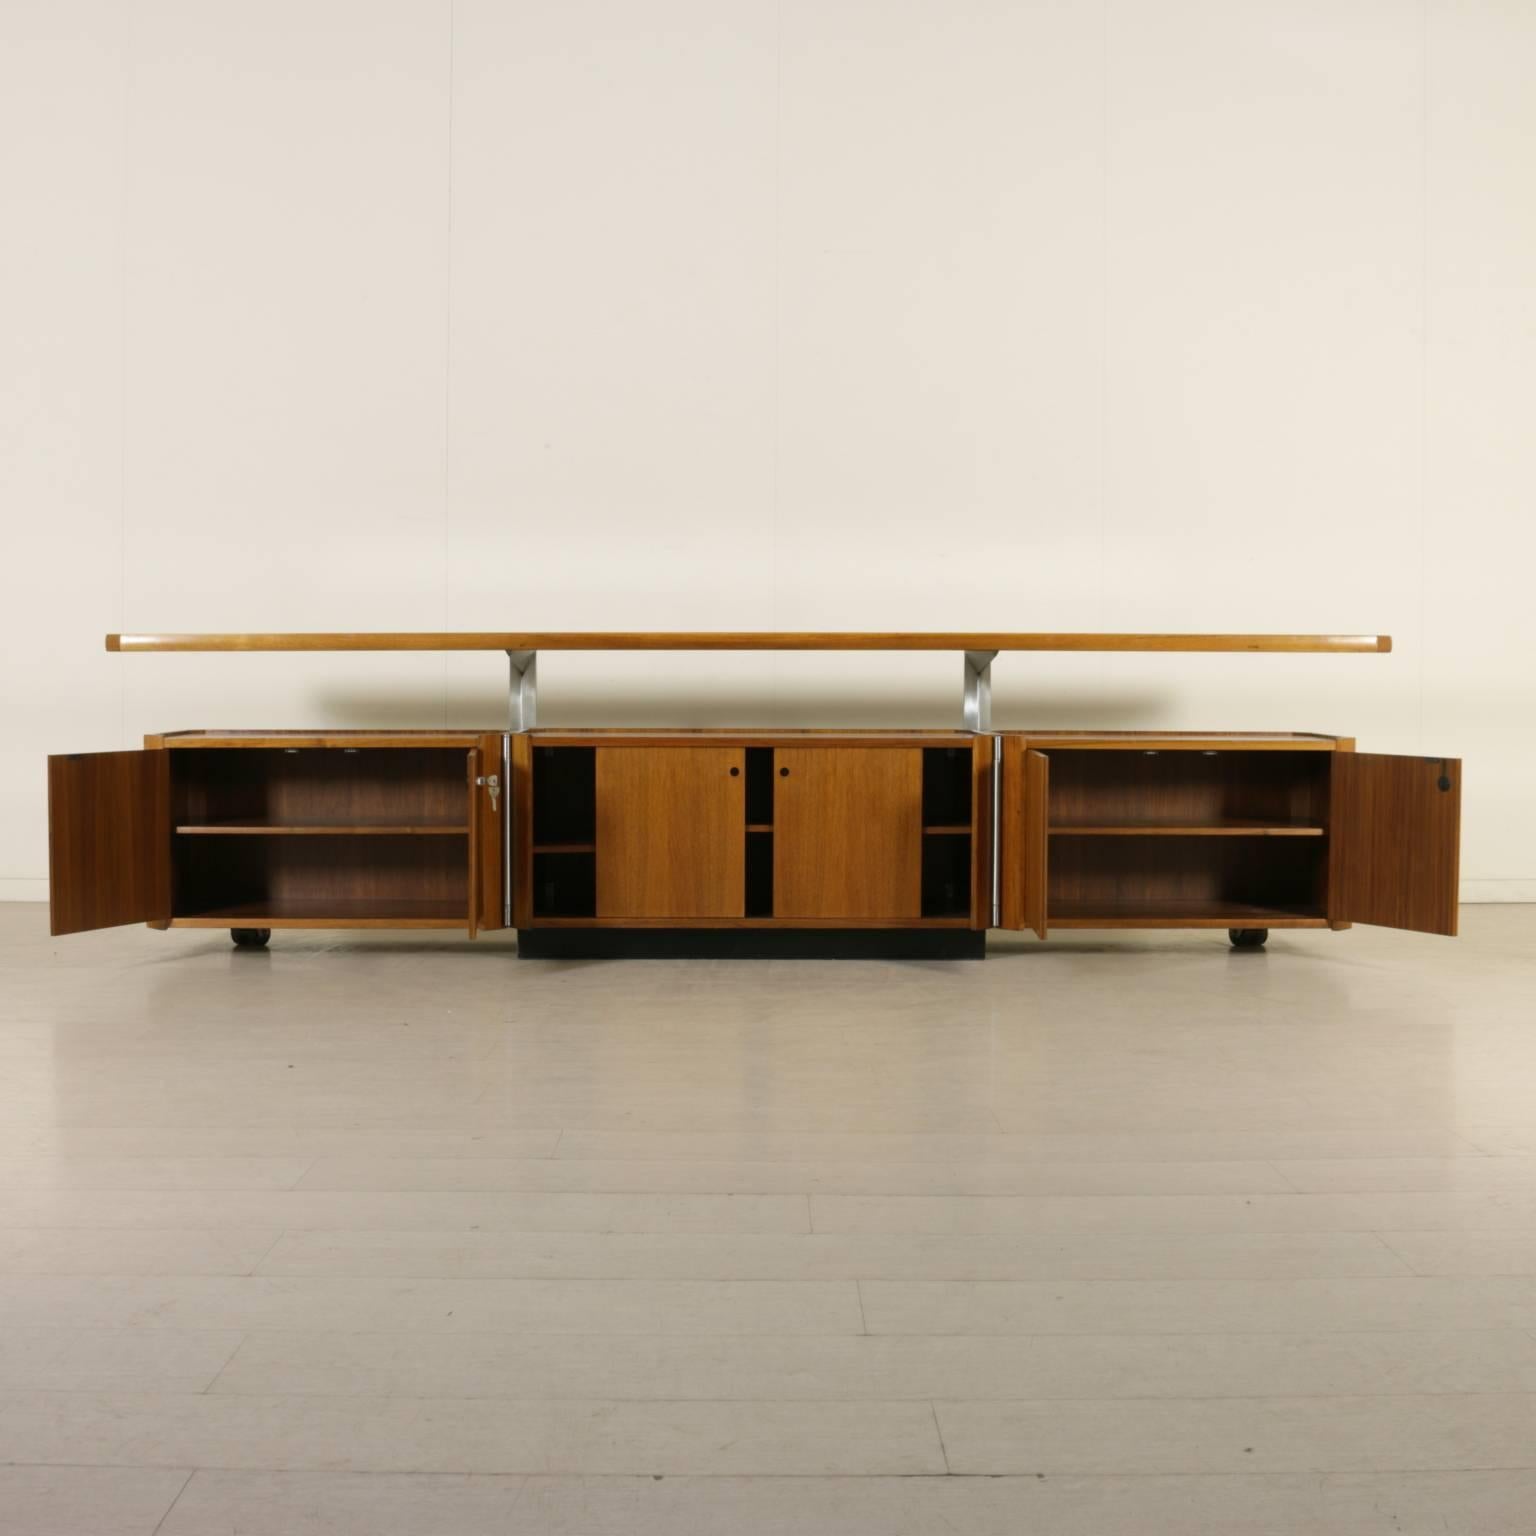 A cabinet designed by Osvaldo Borsani for Tecno, model MG 14, with side elements with adjustable inclination. Walnut veneer, metal structure. Manufactured in Italy, 1960s.